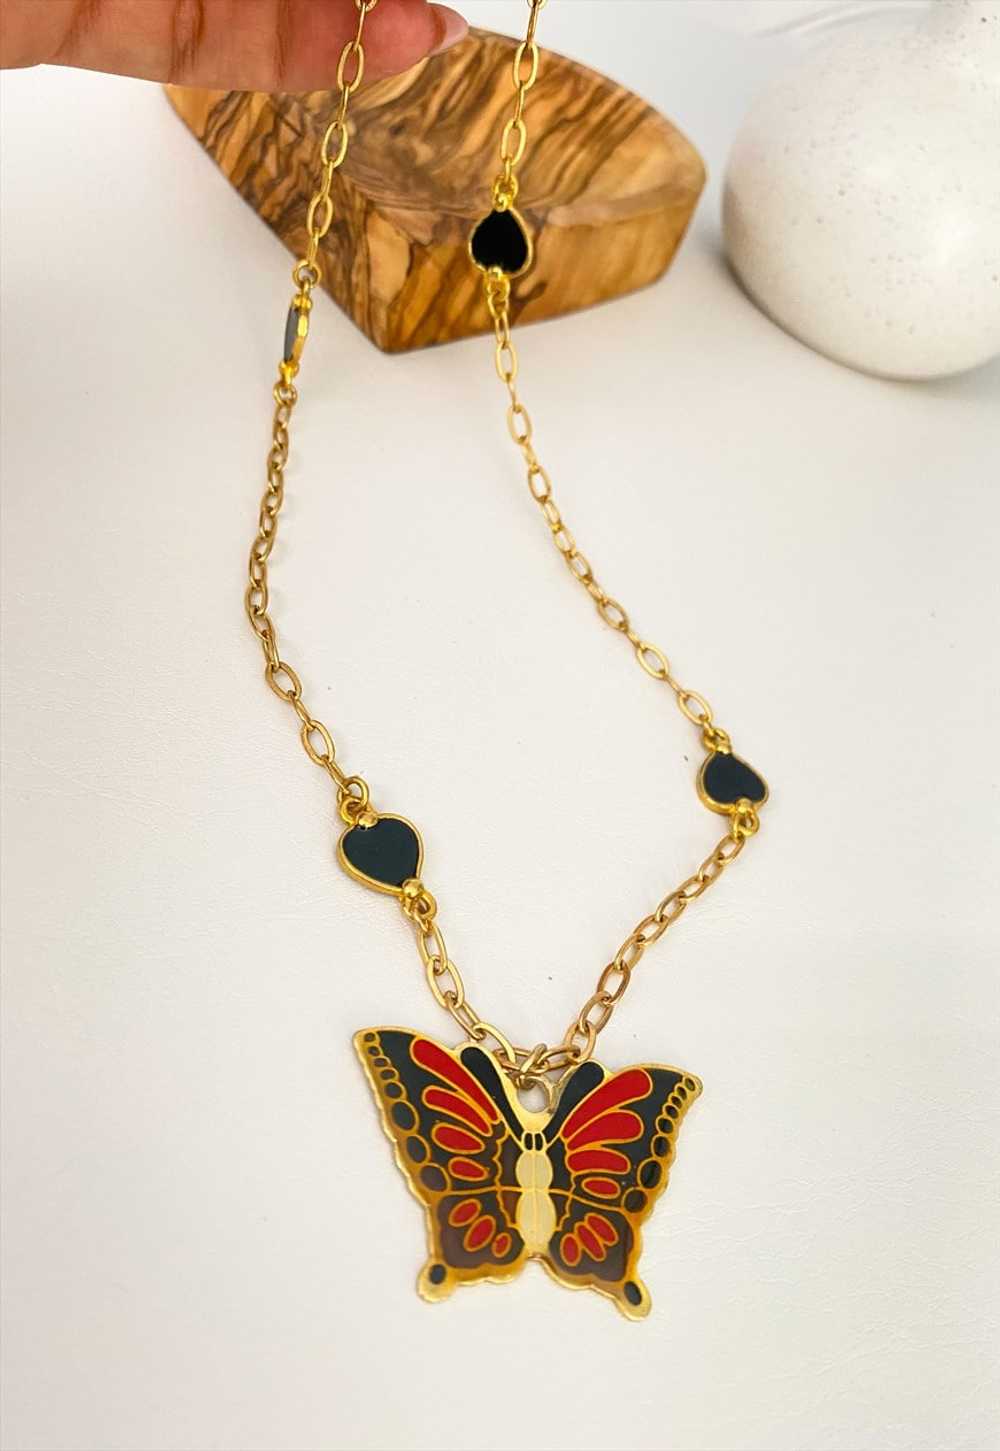 Boho Rose 1980's Heart Chain Butterfly Necklace - image 4